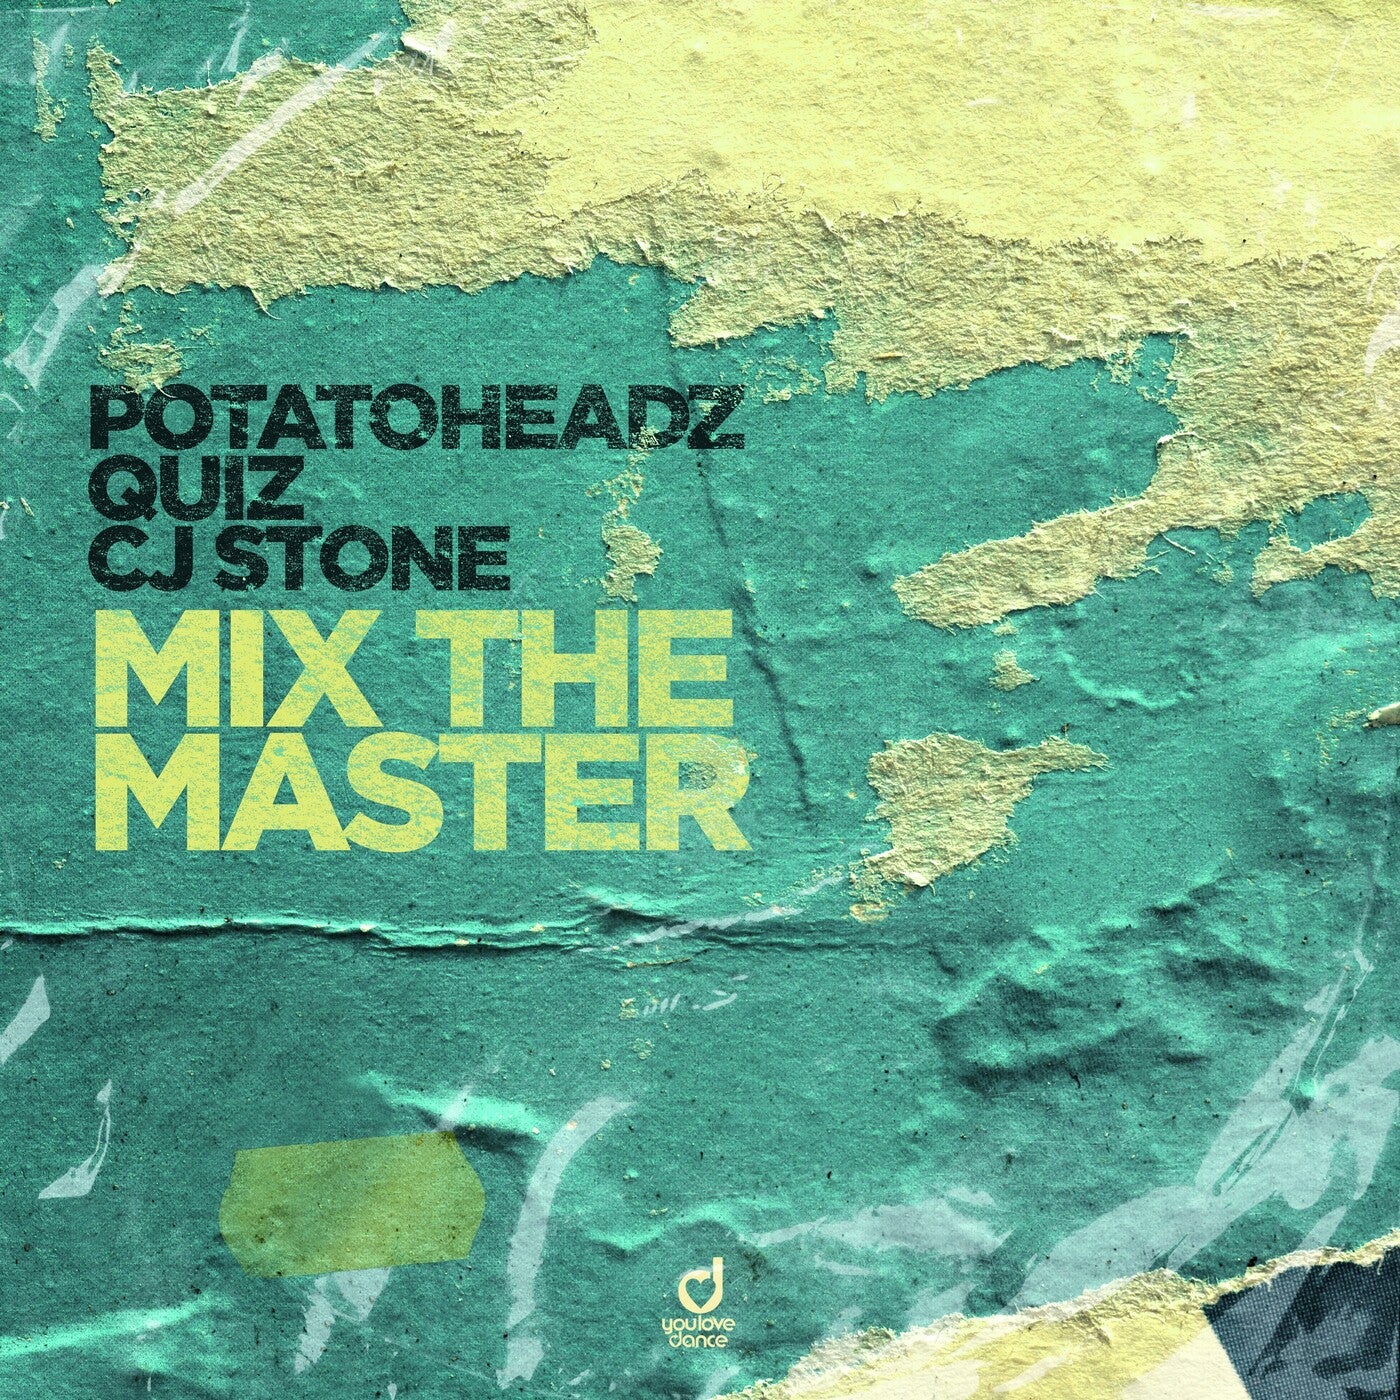 Mix the Master